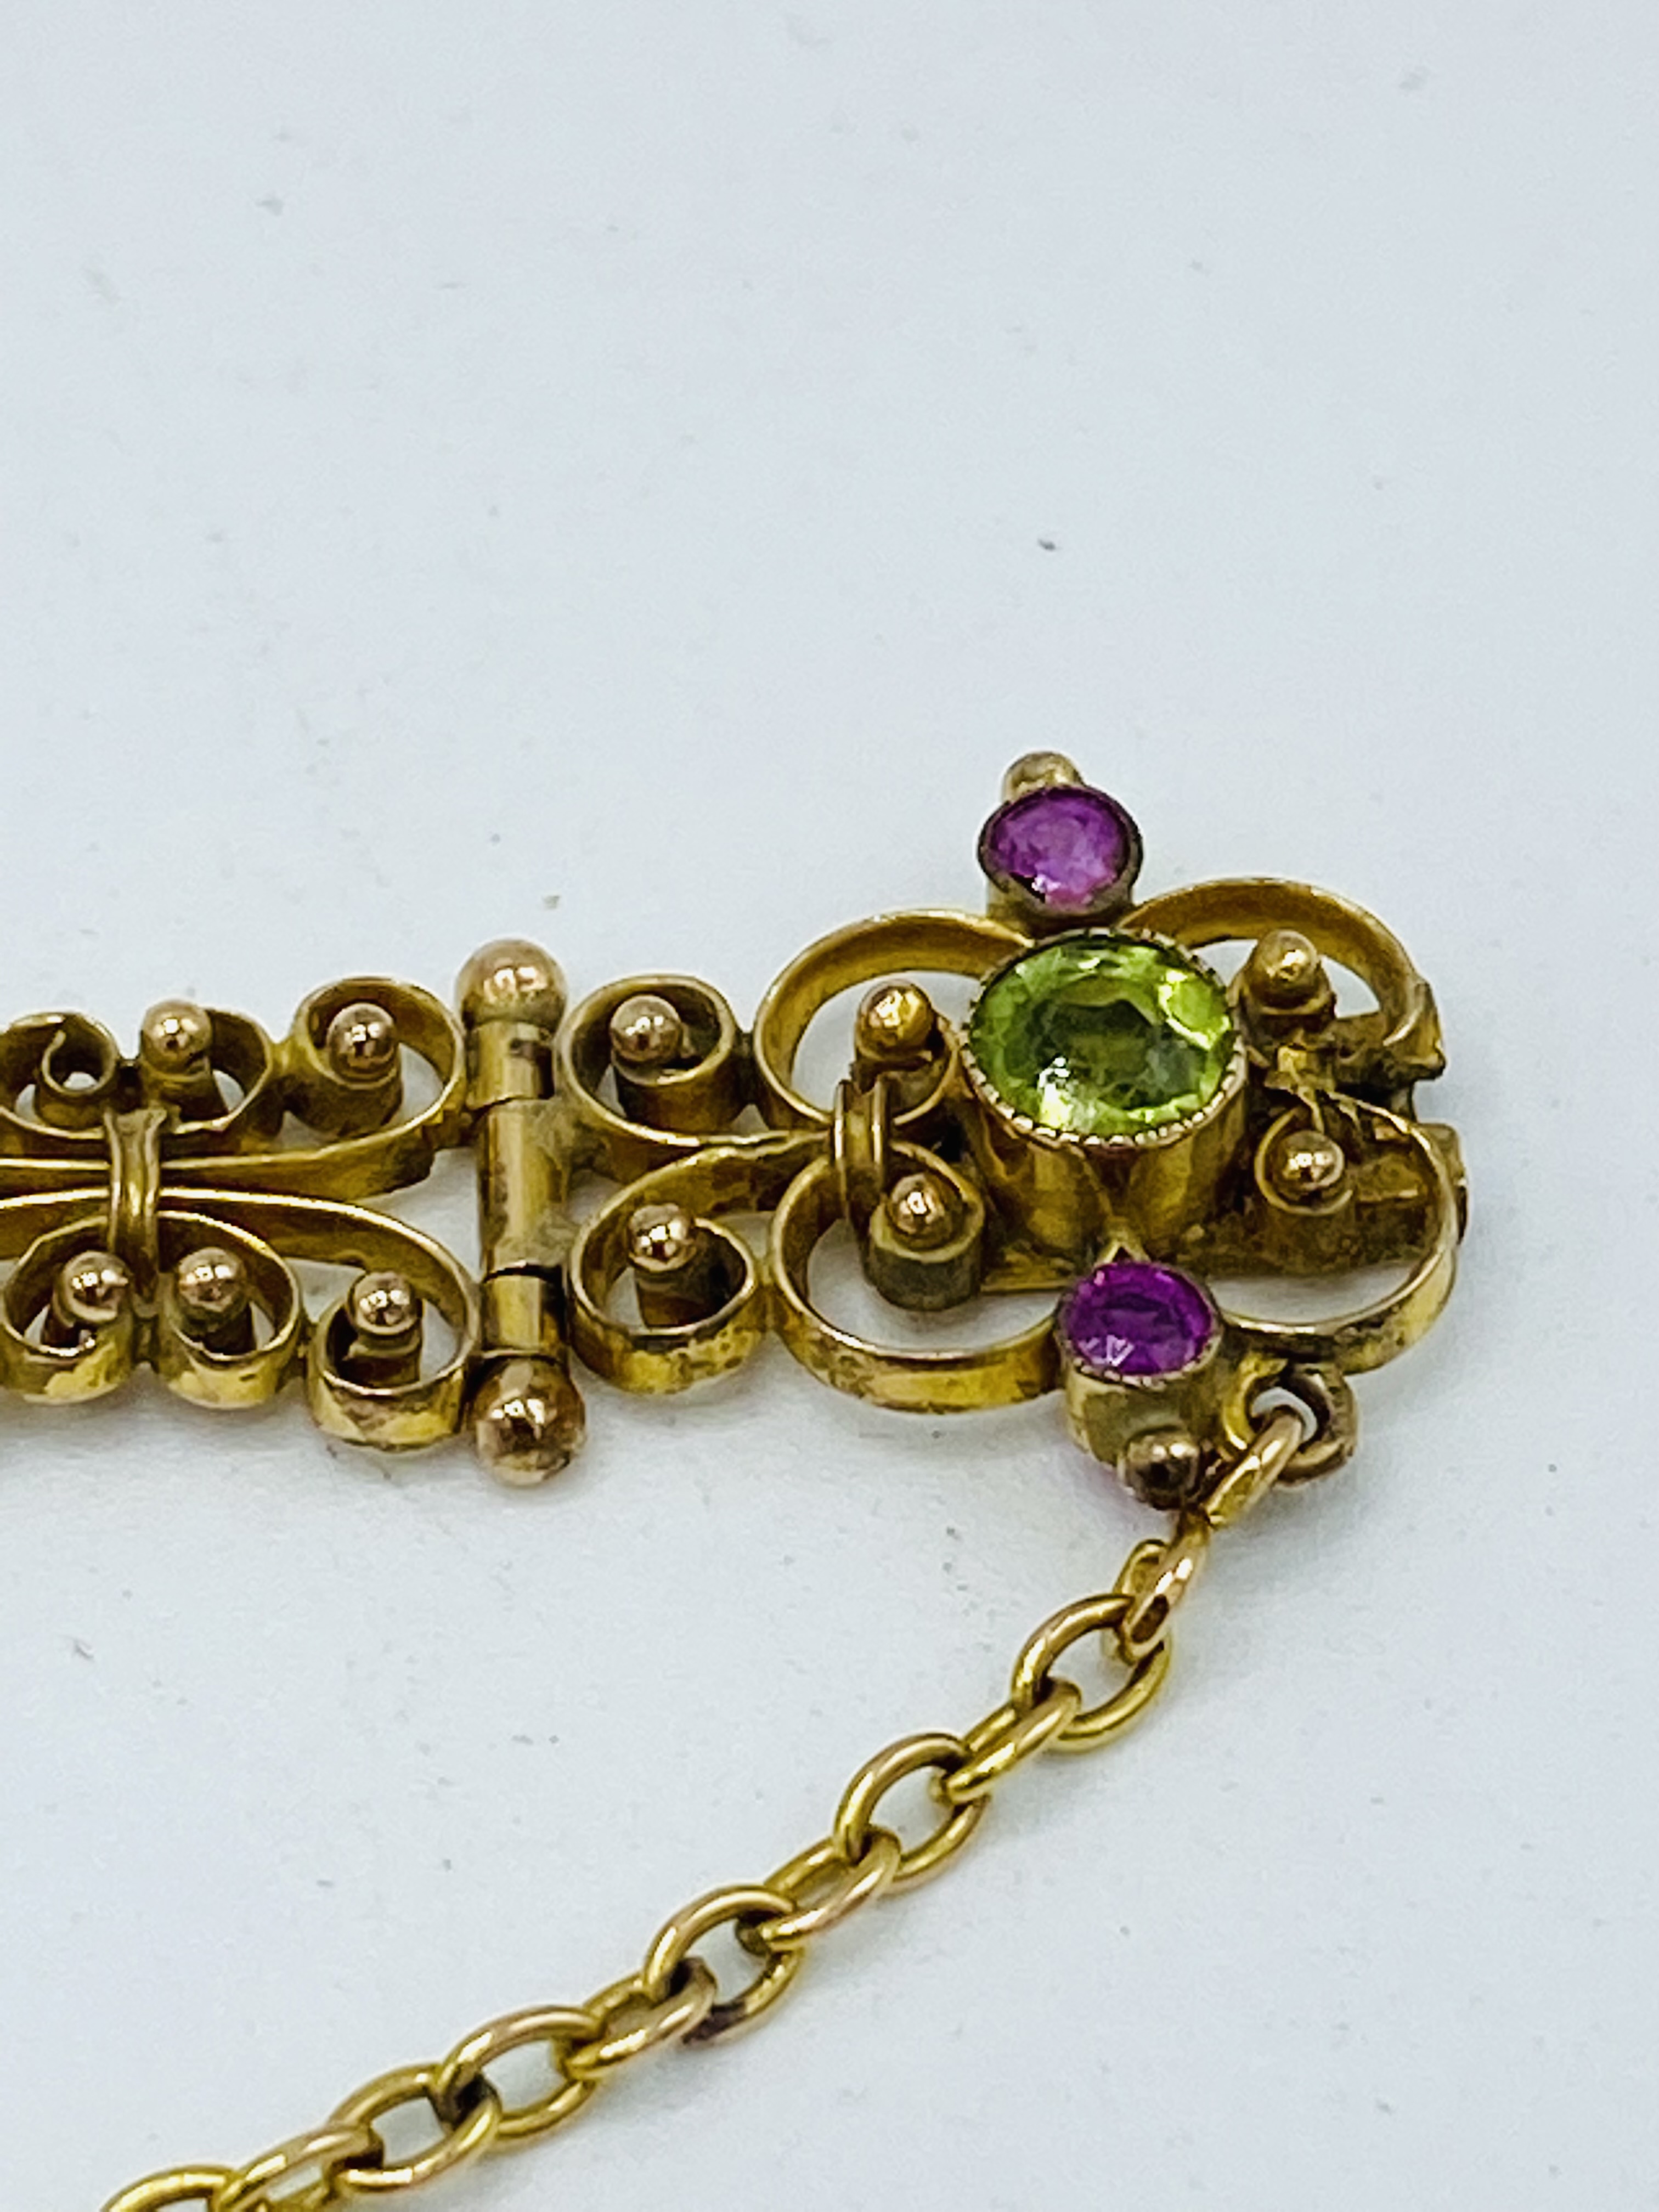 Gold filigree bracelet set with rubies and peridot - Image 7 of 9